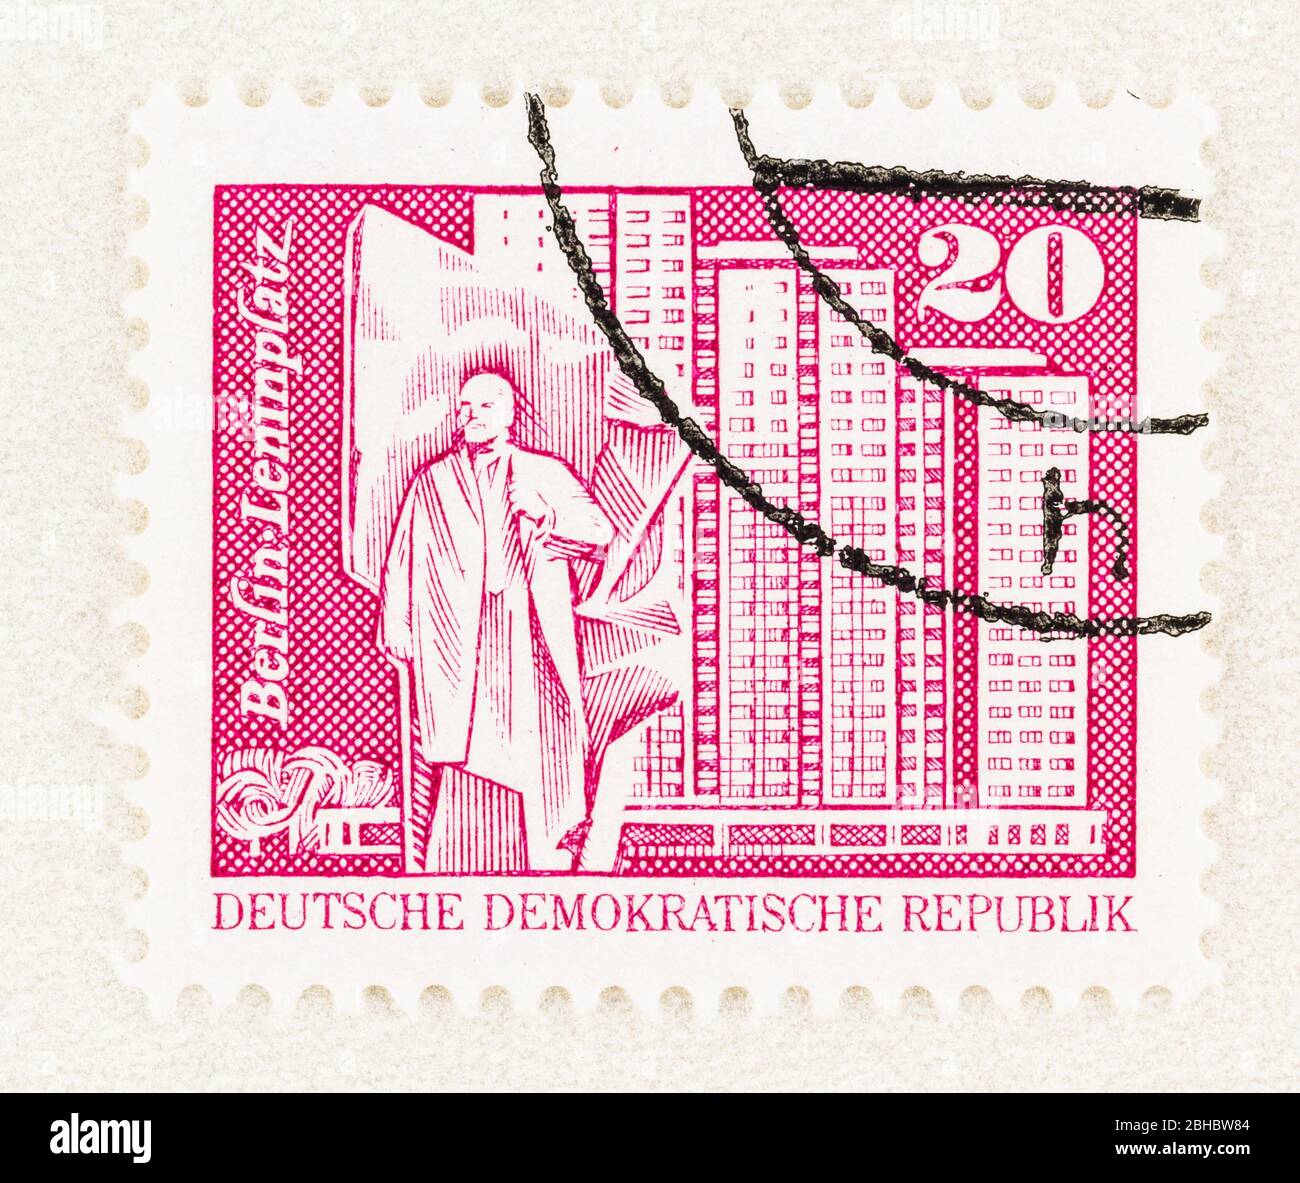 SEATTLE WASHINGTON - April 23, 2020: 1980 East German Stamp featuring a Berlin Leninplatz with statue and residential towers. Small format Stock Photo